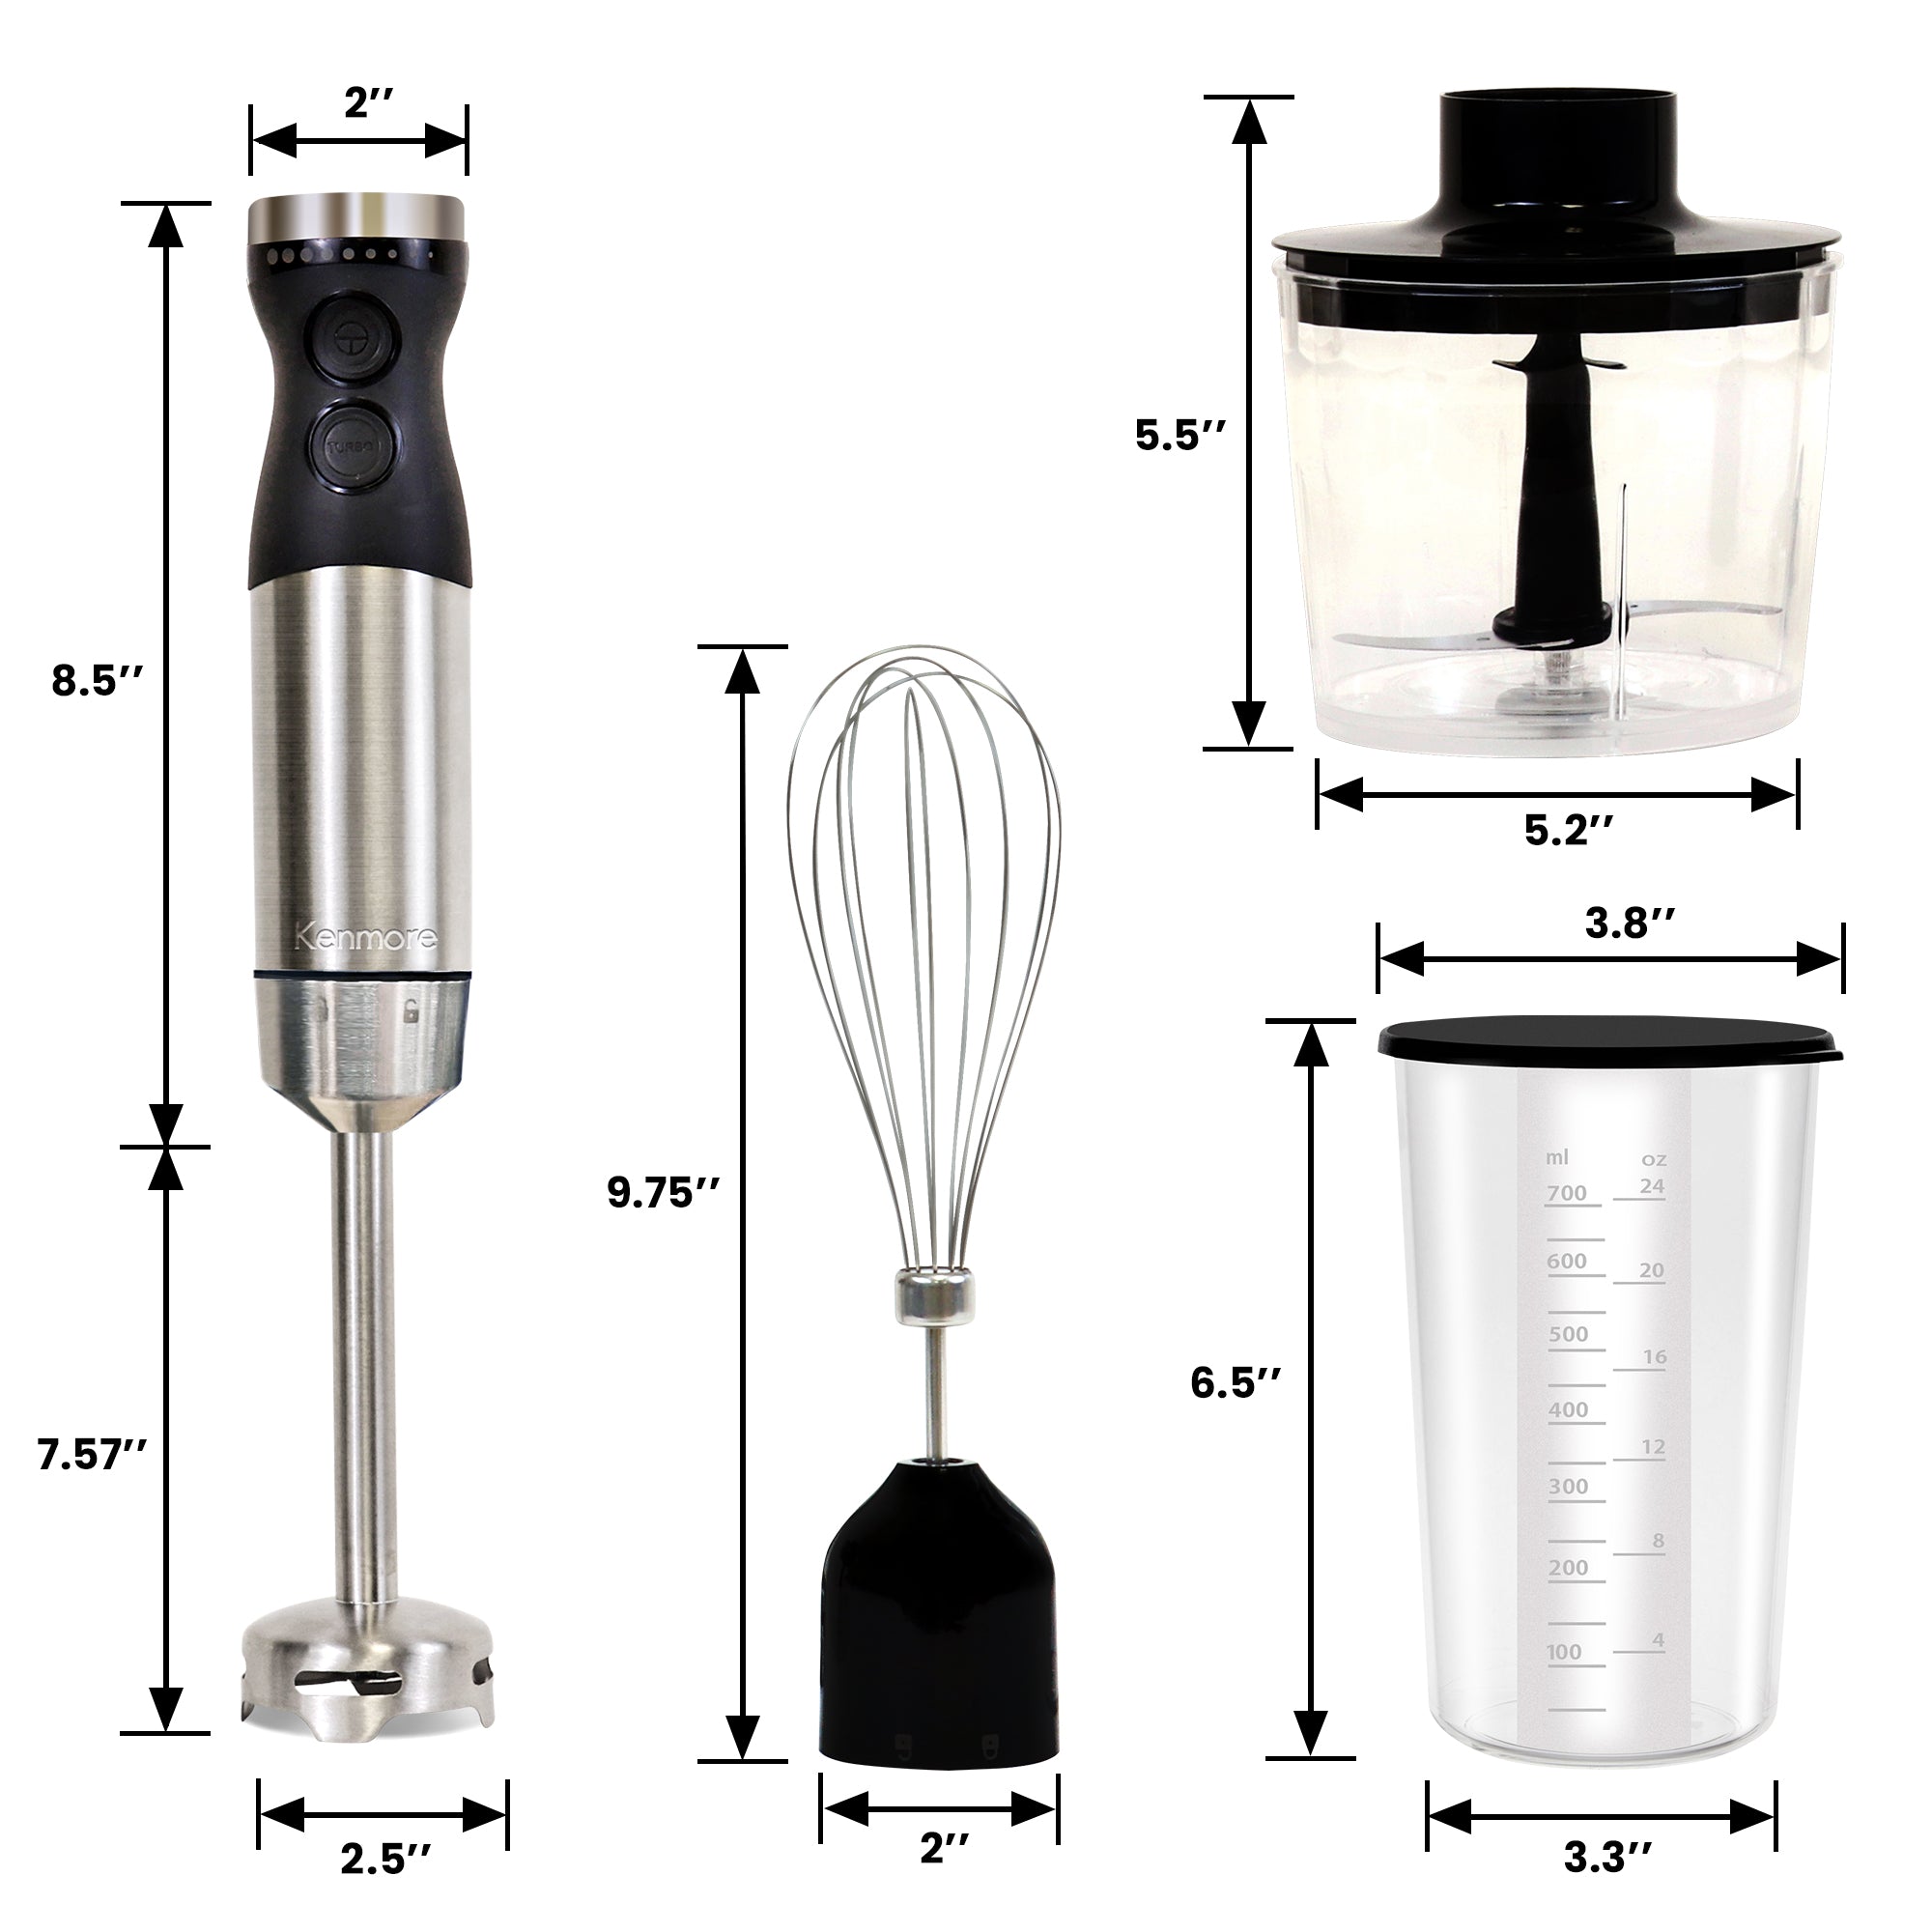 Immersion blender and attachments on a white background with dimensions listed